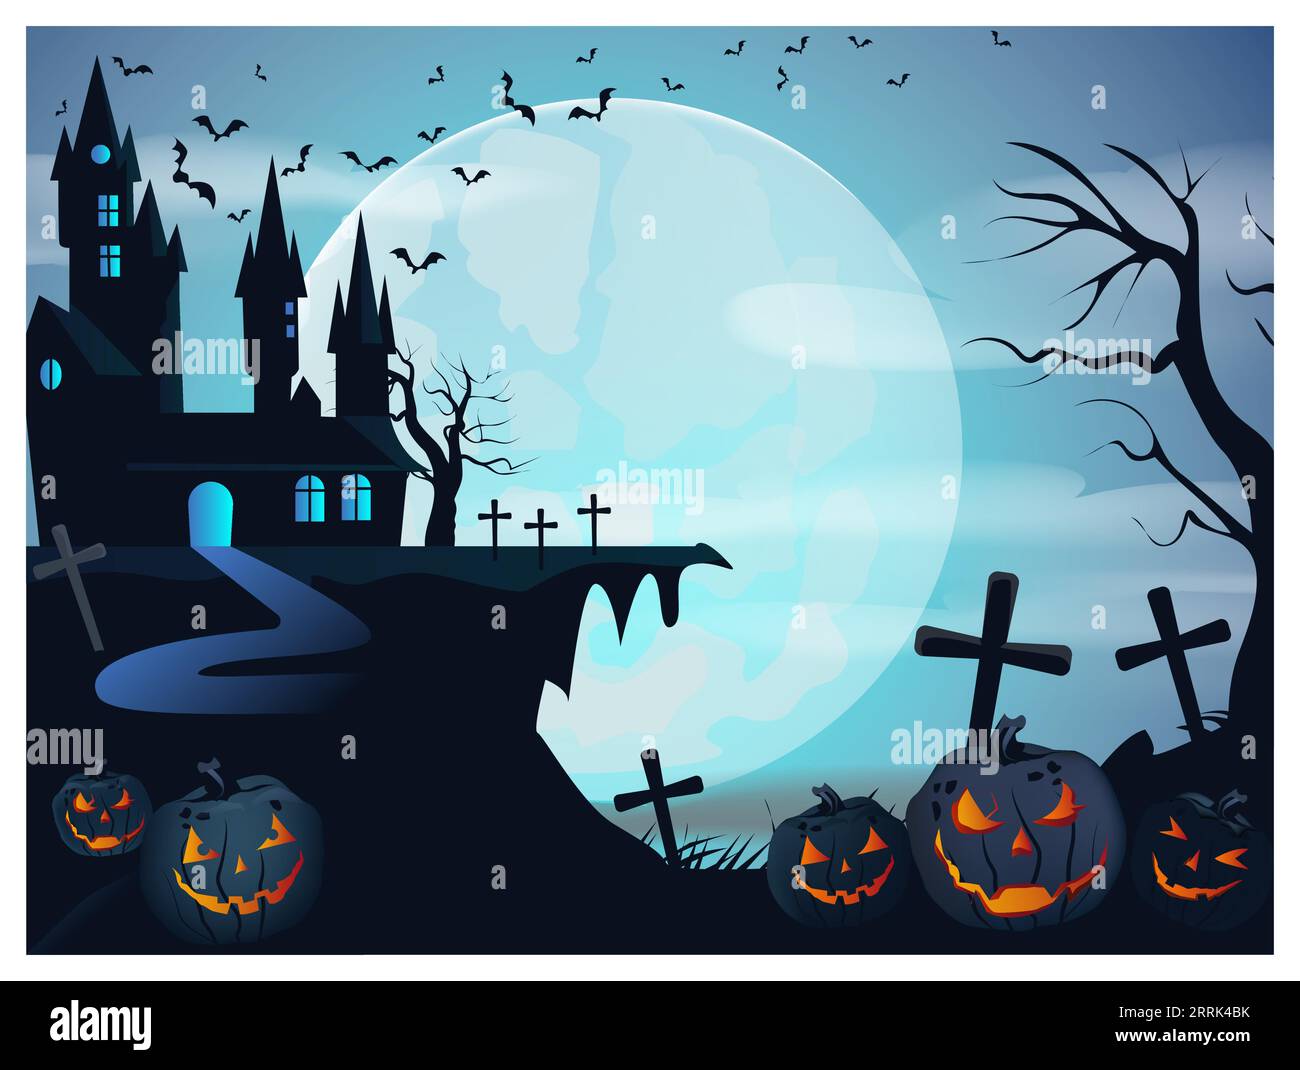 Narrow road to gothic castle vector illustration Stock Vector